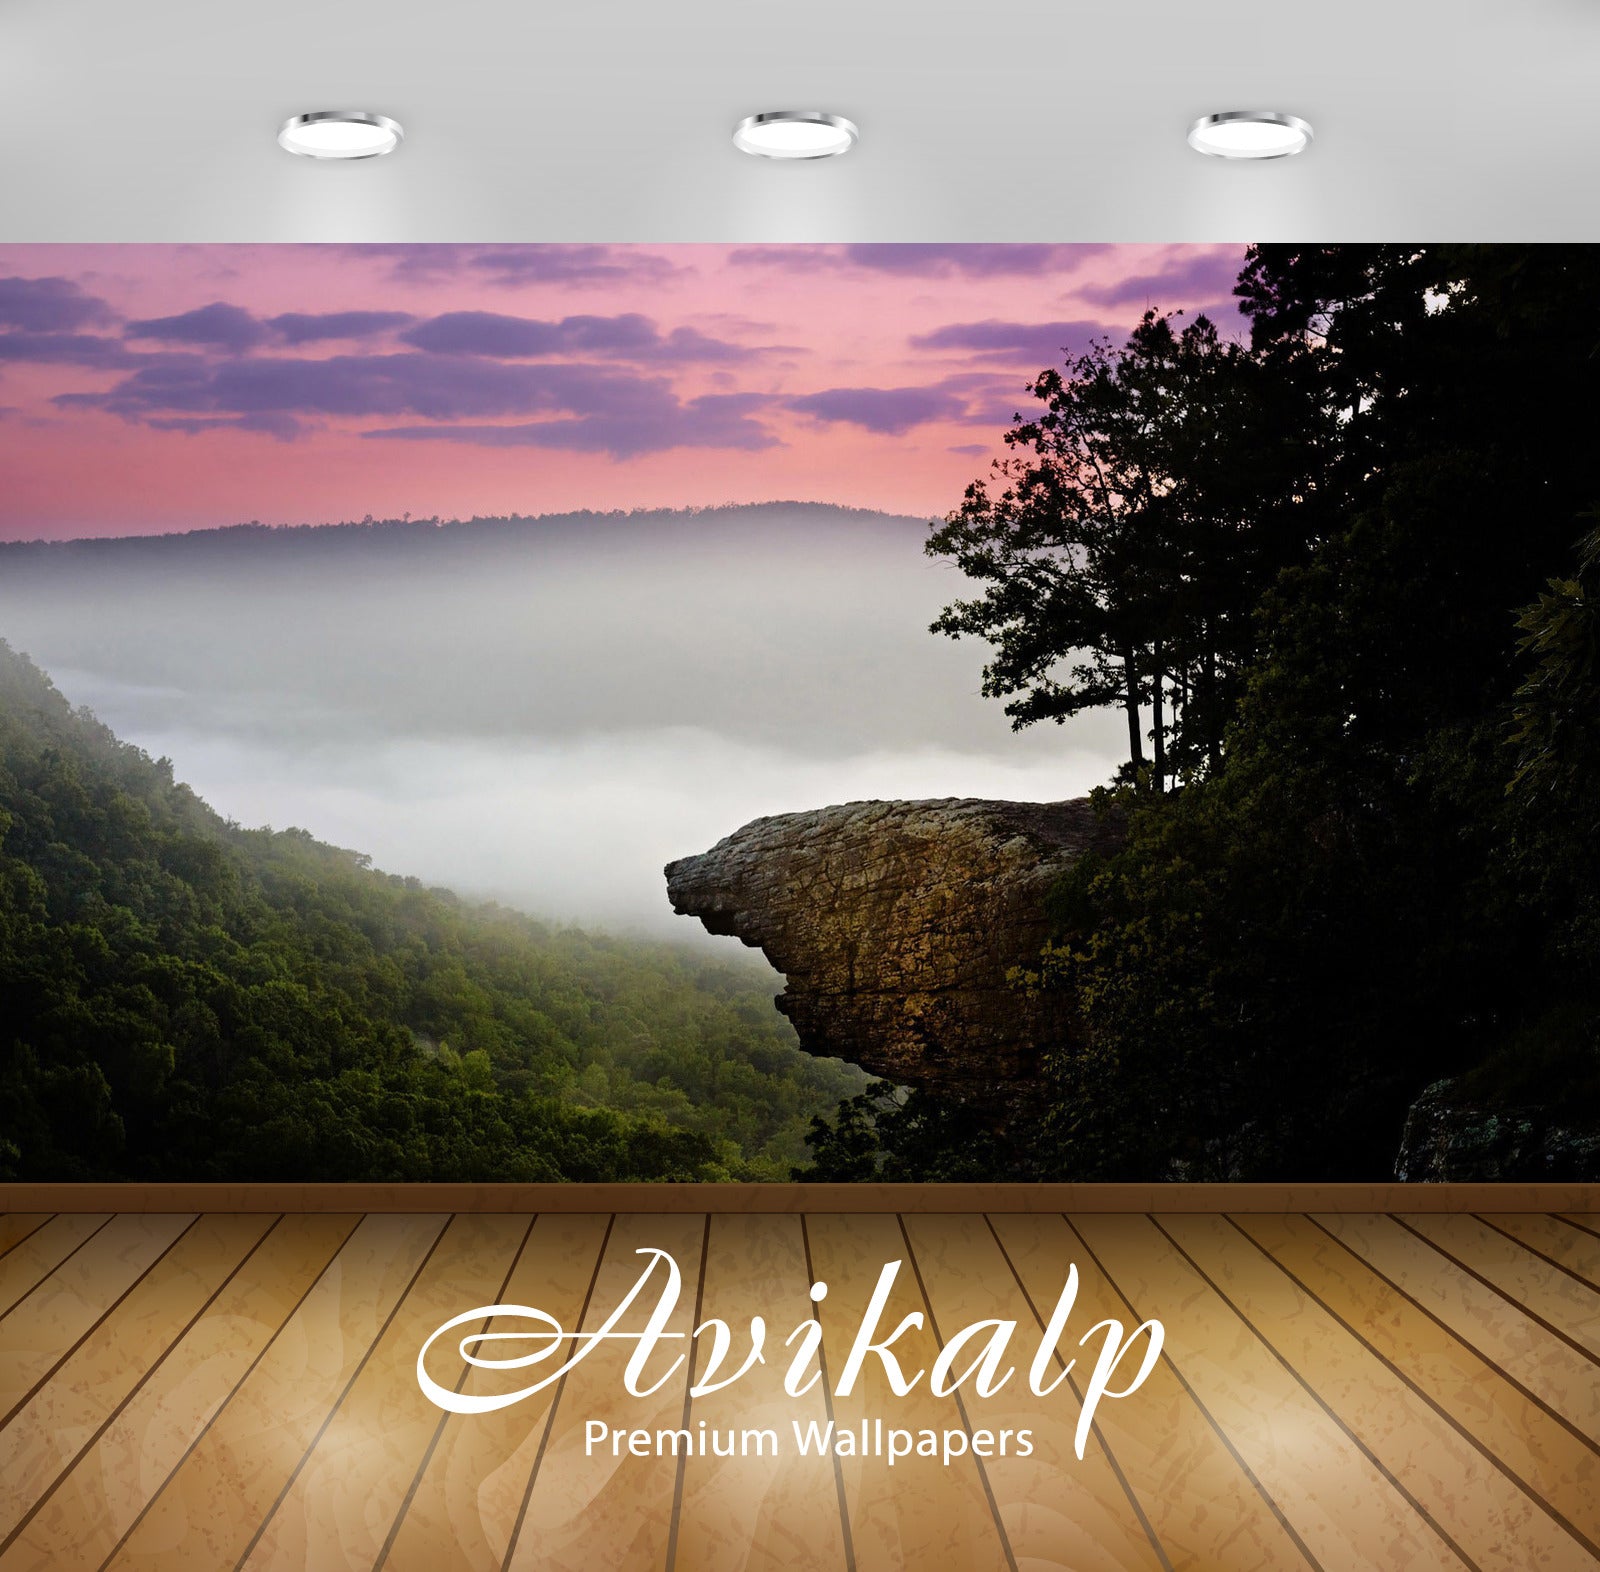 Avikalp Exclusive Awi6688 Whitaker Point Arkansas Nature Full HD Wallpapers for Living room, Hall, K